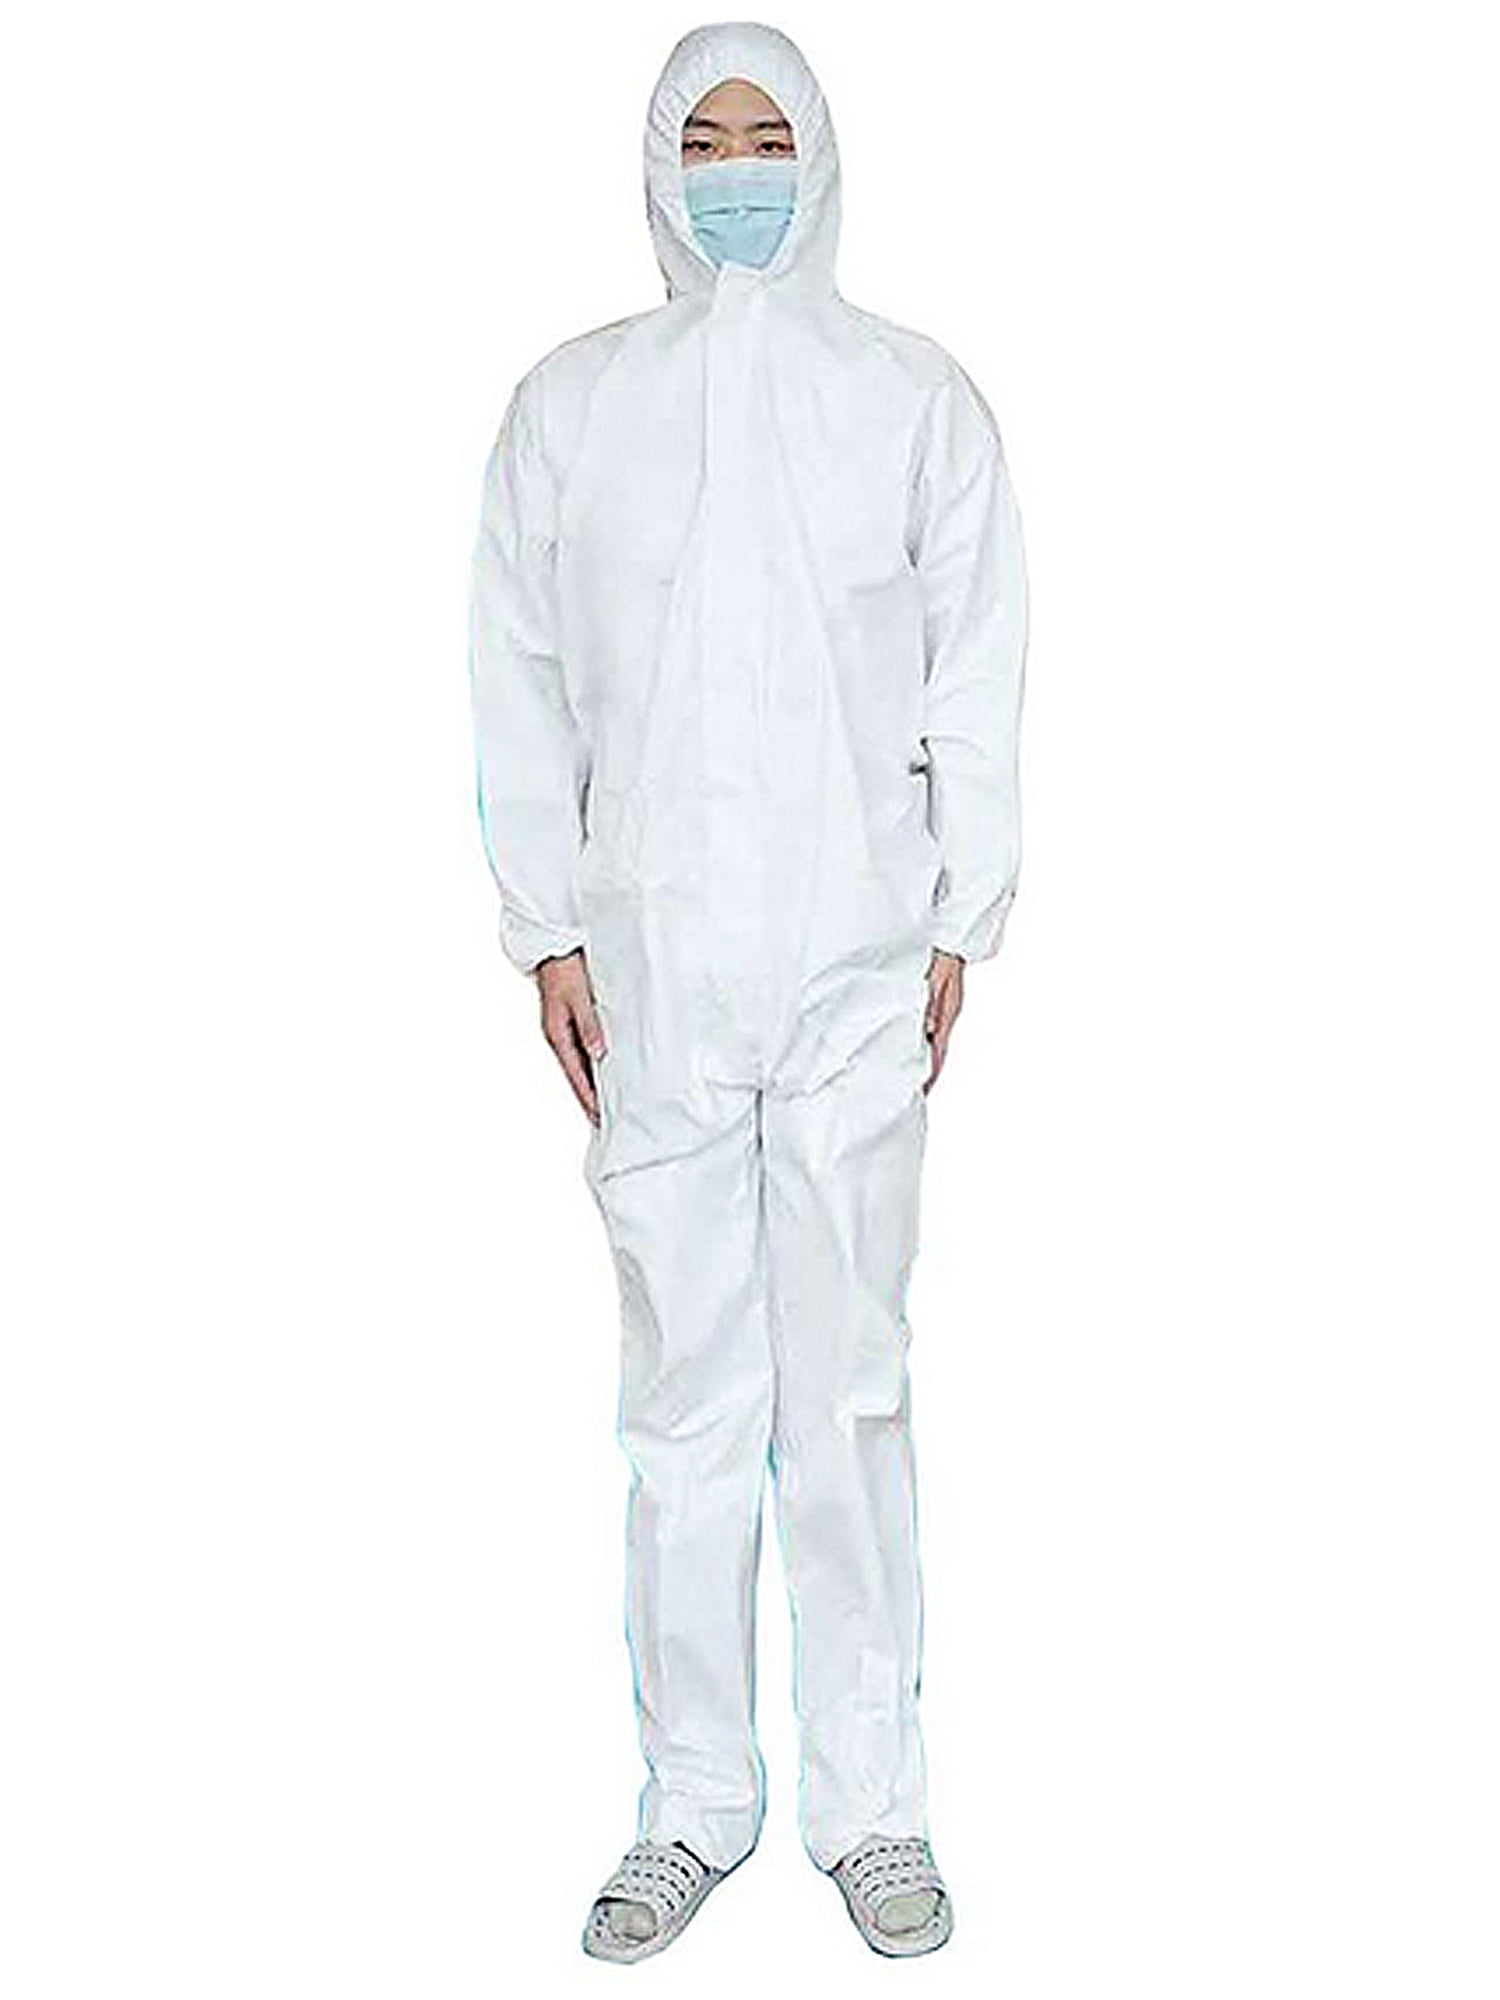 1PC HAZMAT SUIT ANTI-VIRUS PROTECTION CLOTHING COVERALL DISPOSABLE WASHABLE 